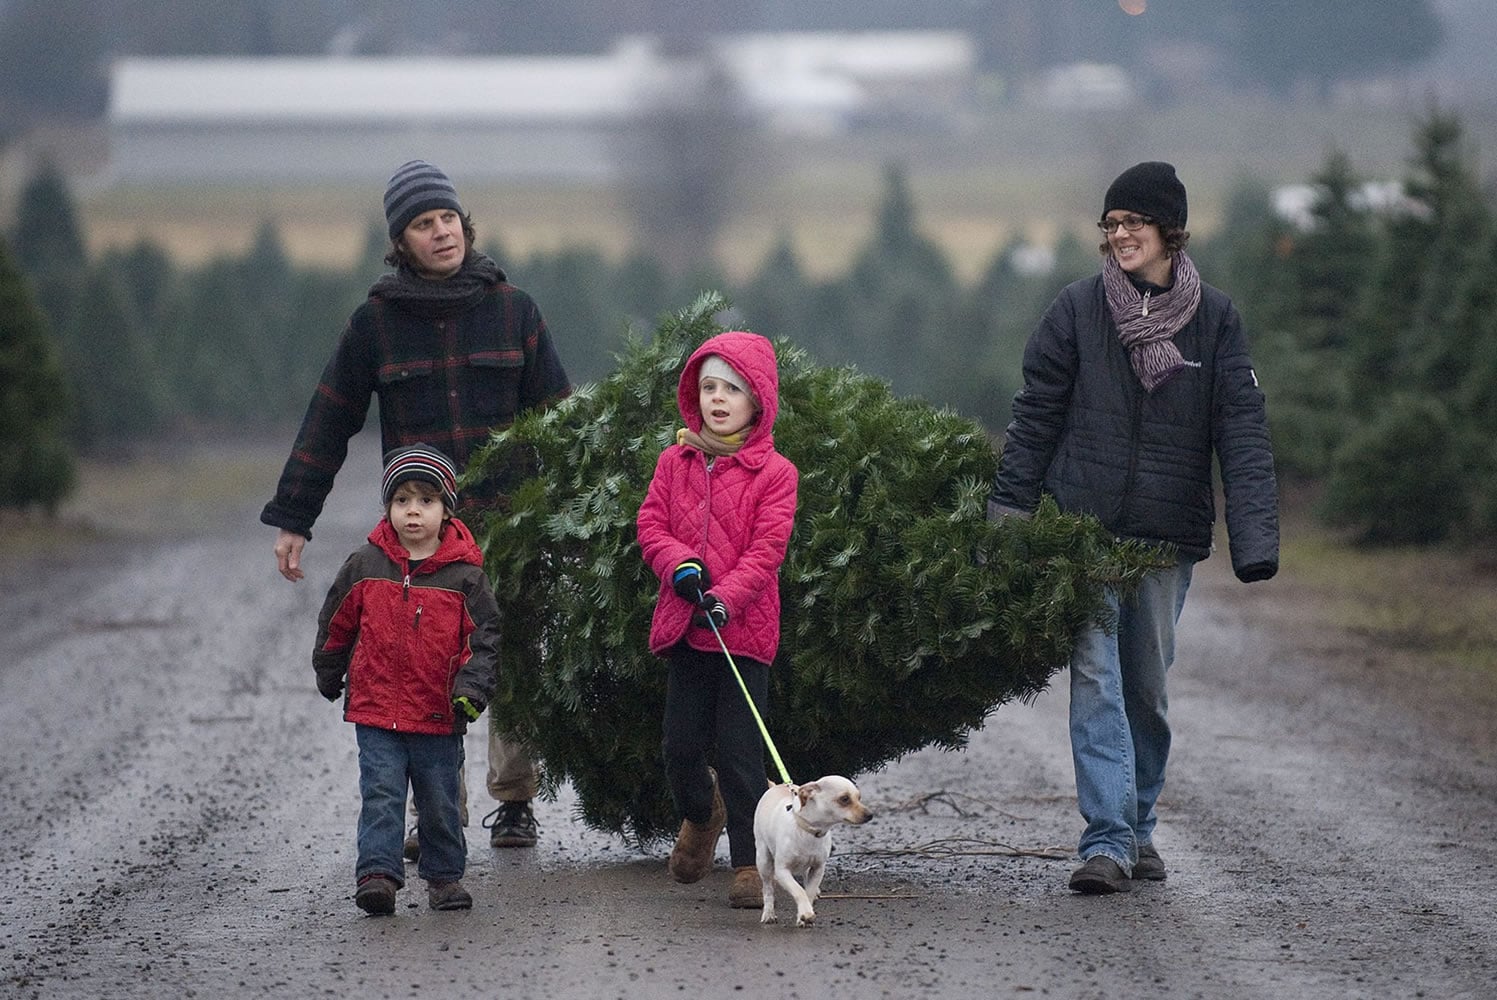 The Olson family, from left, Abraham, 4, David, Agatha, 8, with Captain, and Jodi, ventured from Portland to Thornton's Treeland in Vancouver for the family Christmas tree on Sunday.